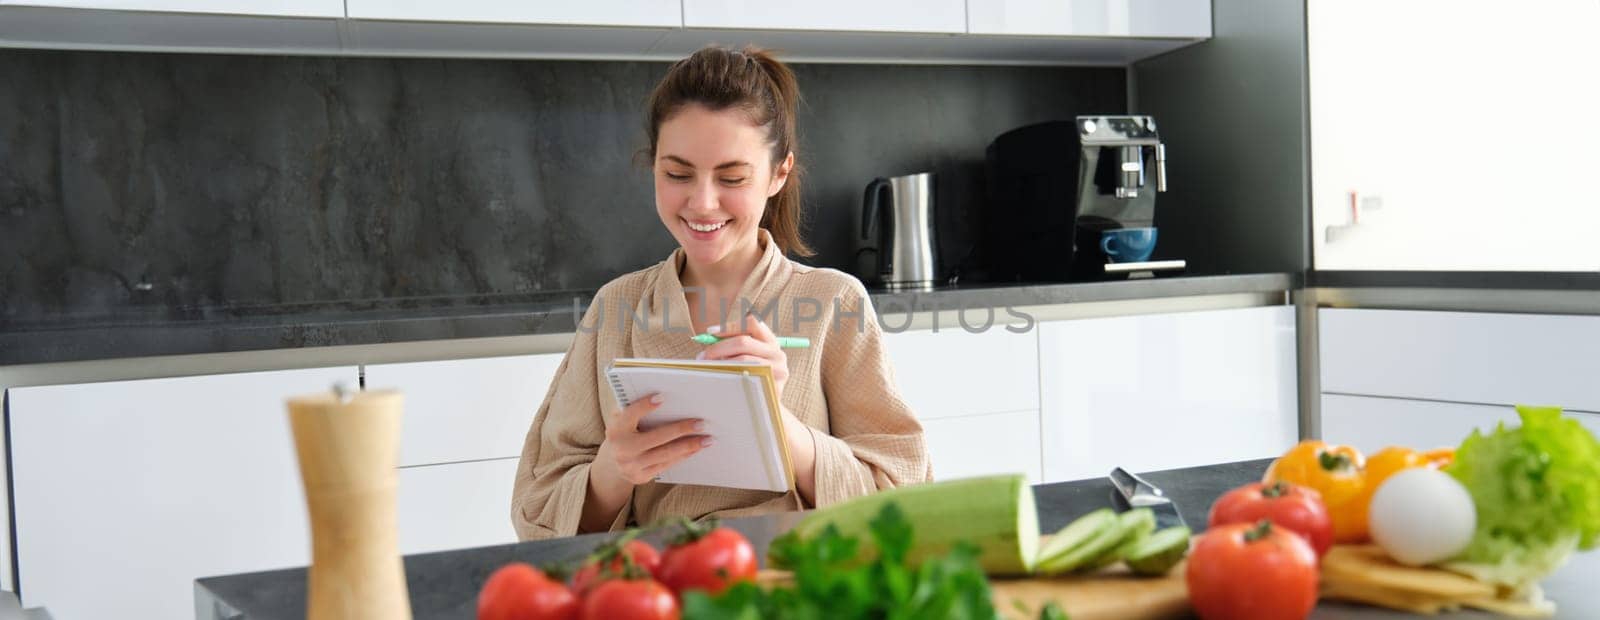 Portrait of beautiful, smiling young woman making list of meals, writing down recipe, sitting in the kitchen with vegetables, doing house errands.